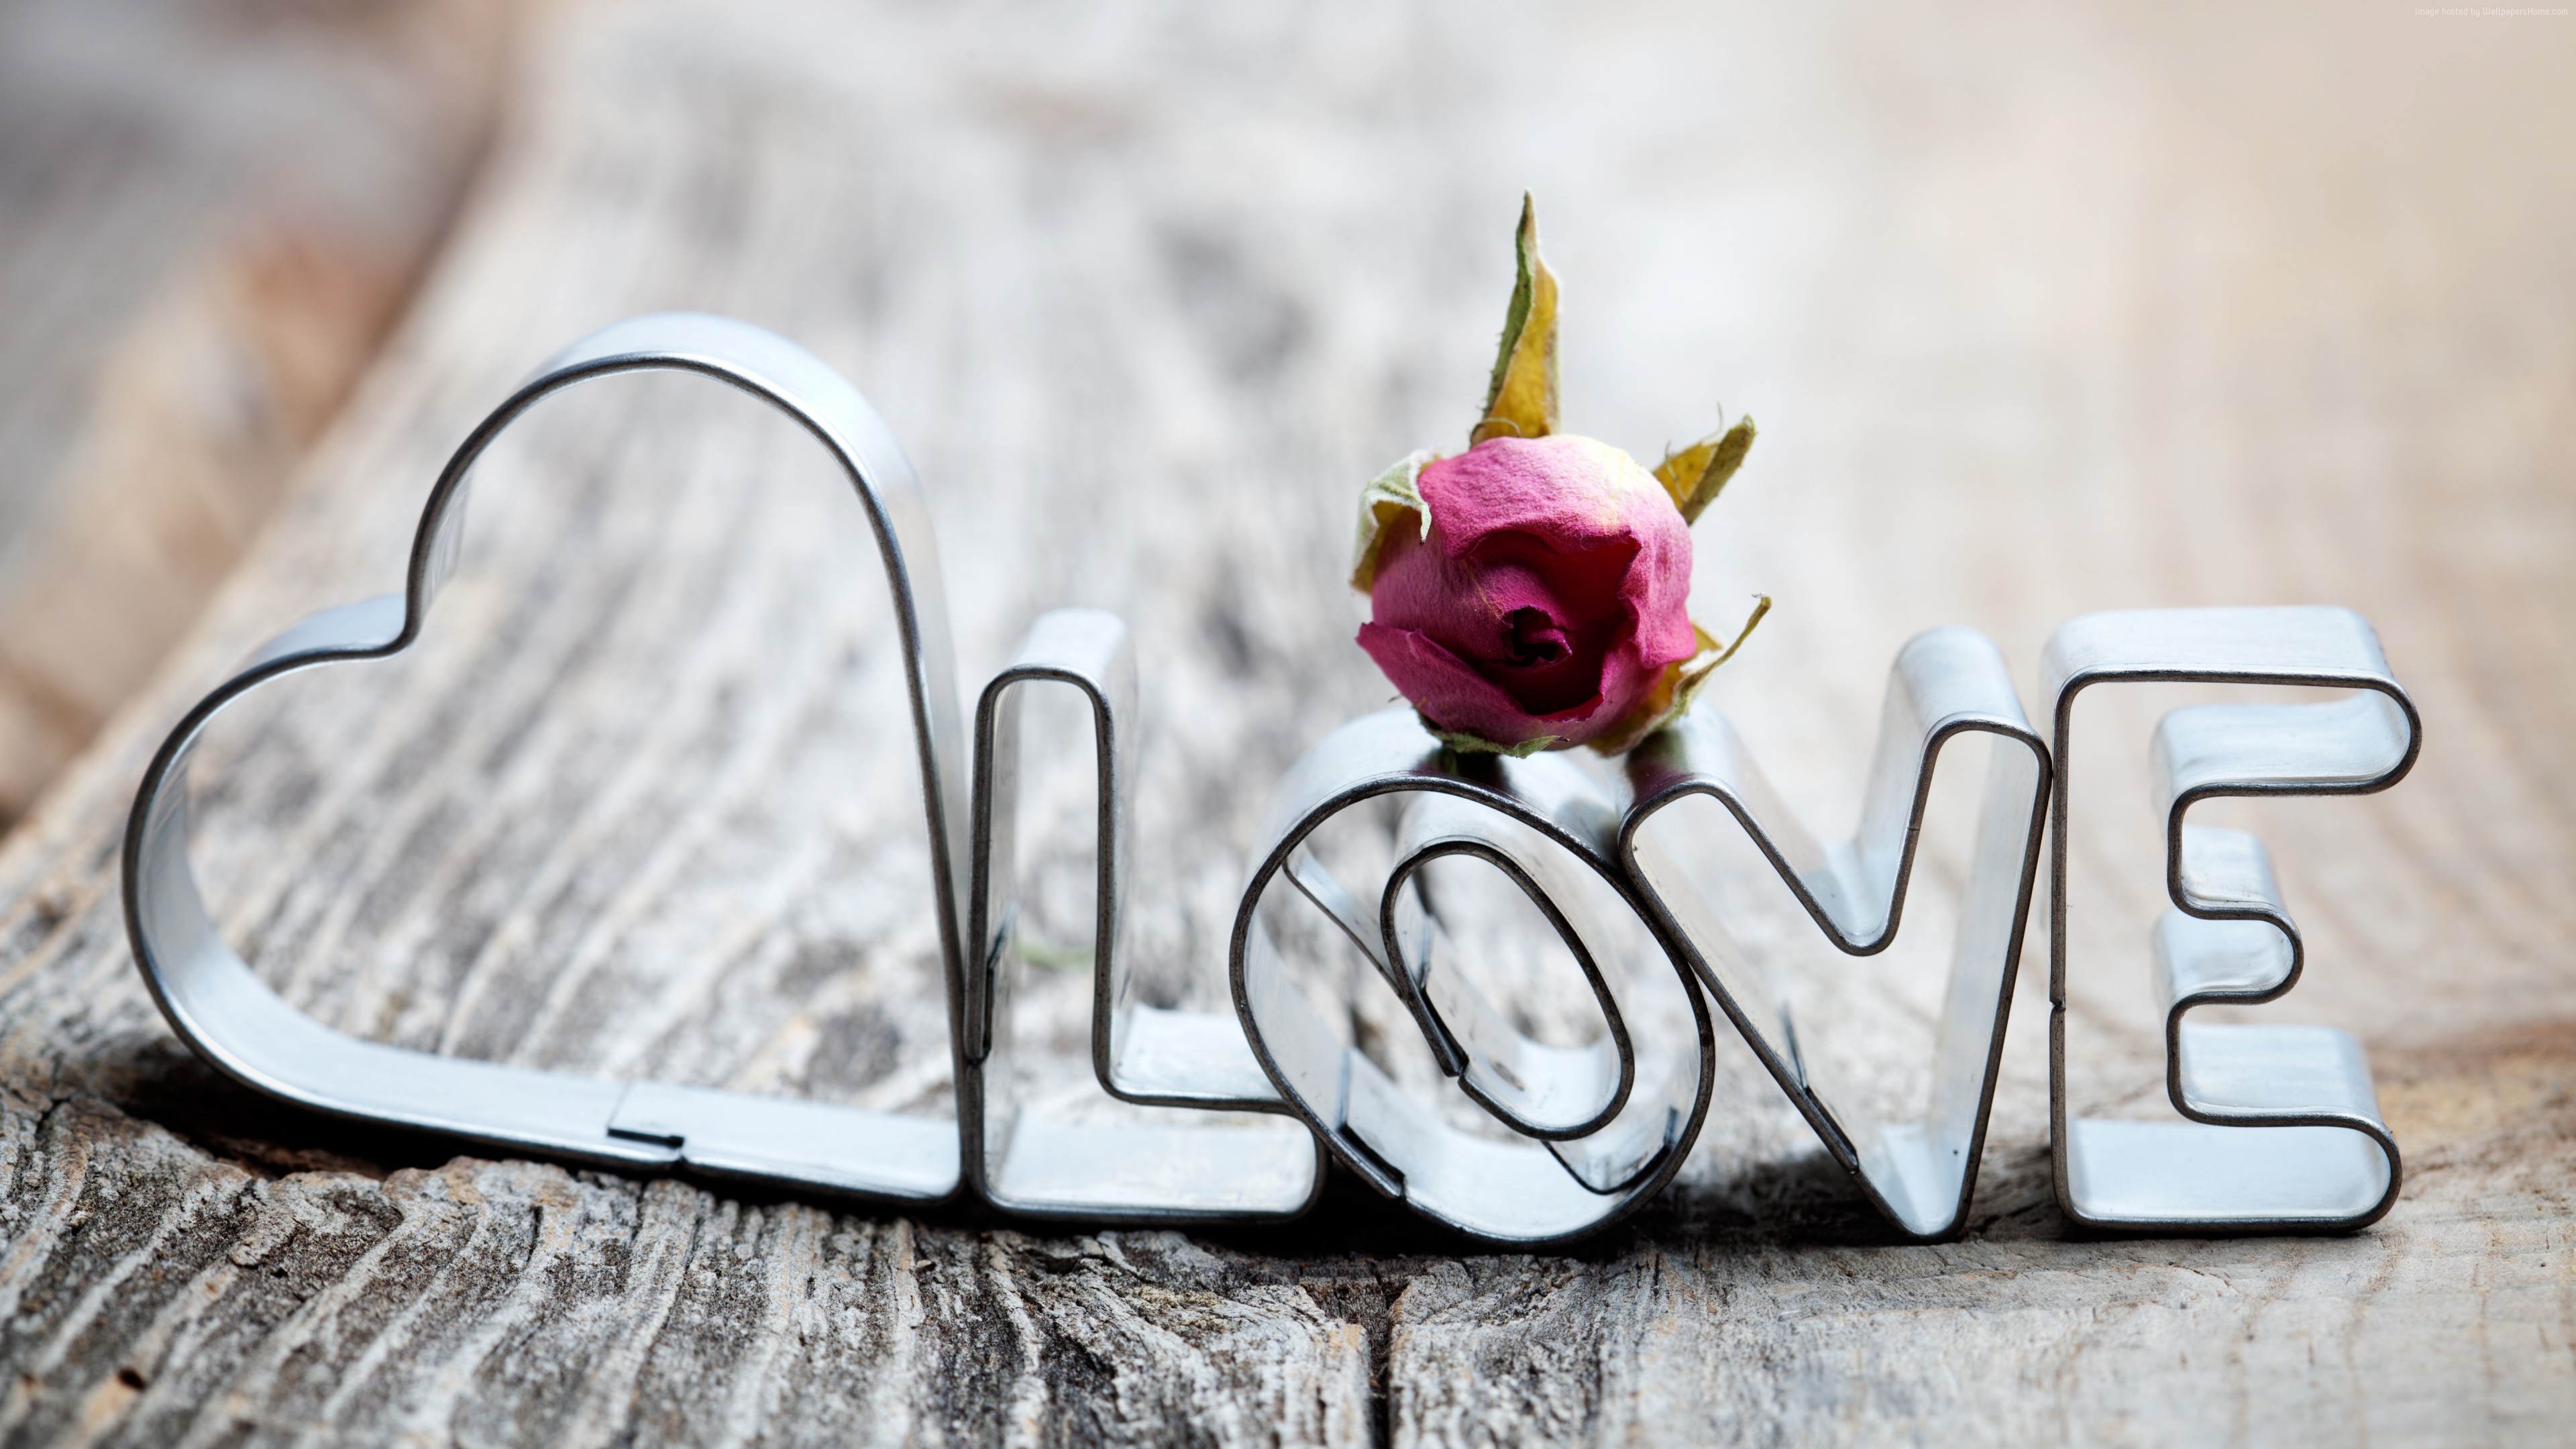 Stock Images love image, heart, rose, 5k, Stock Images